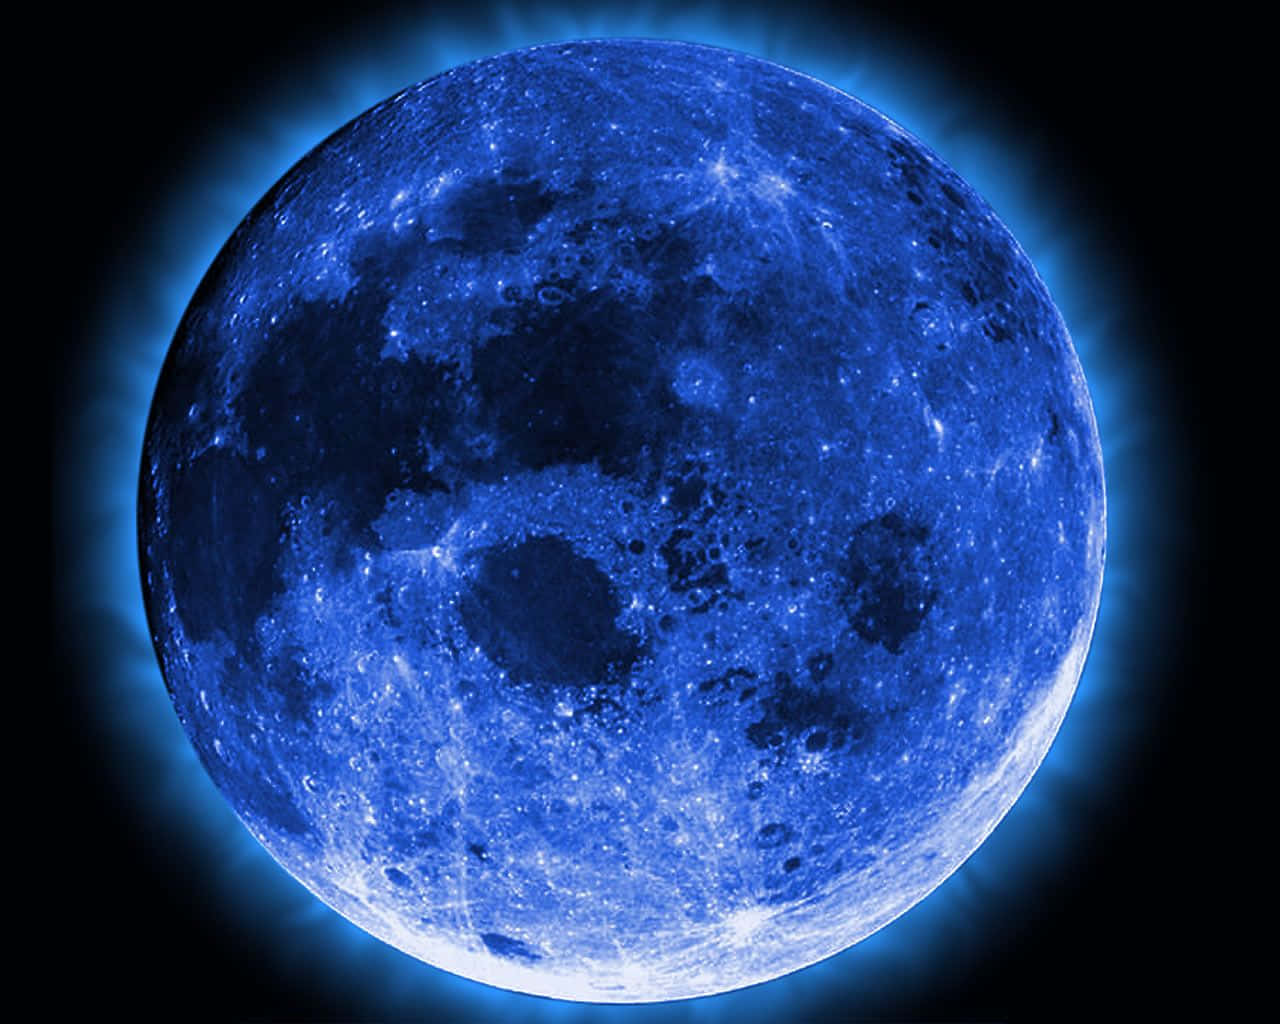 A beautiful view of the full moon's night sky.